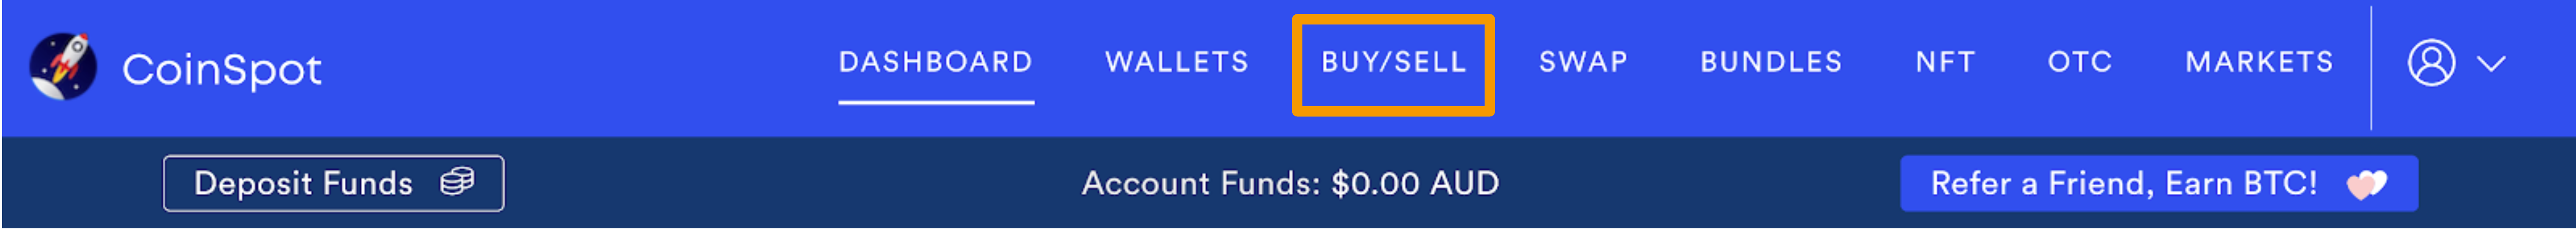 CoinSpot_Buy_Sell.png